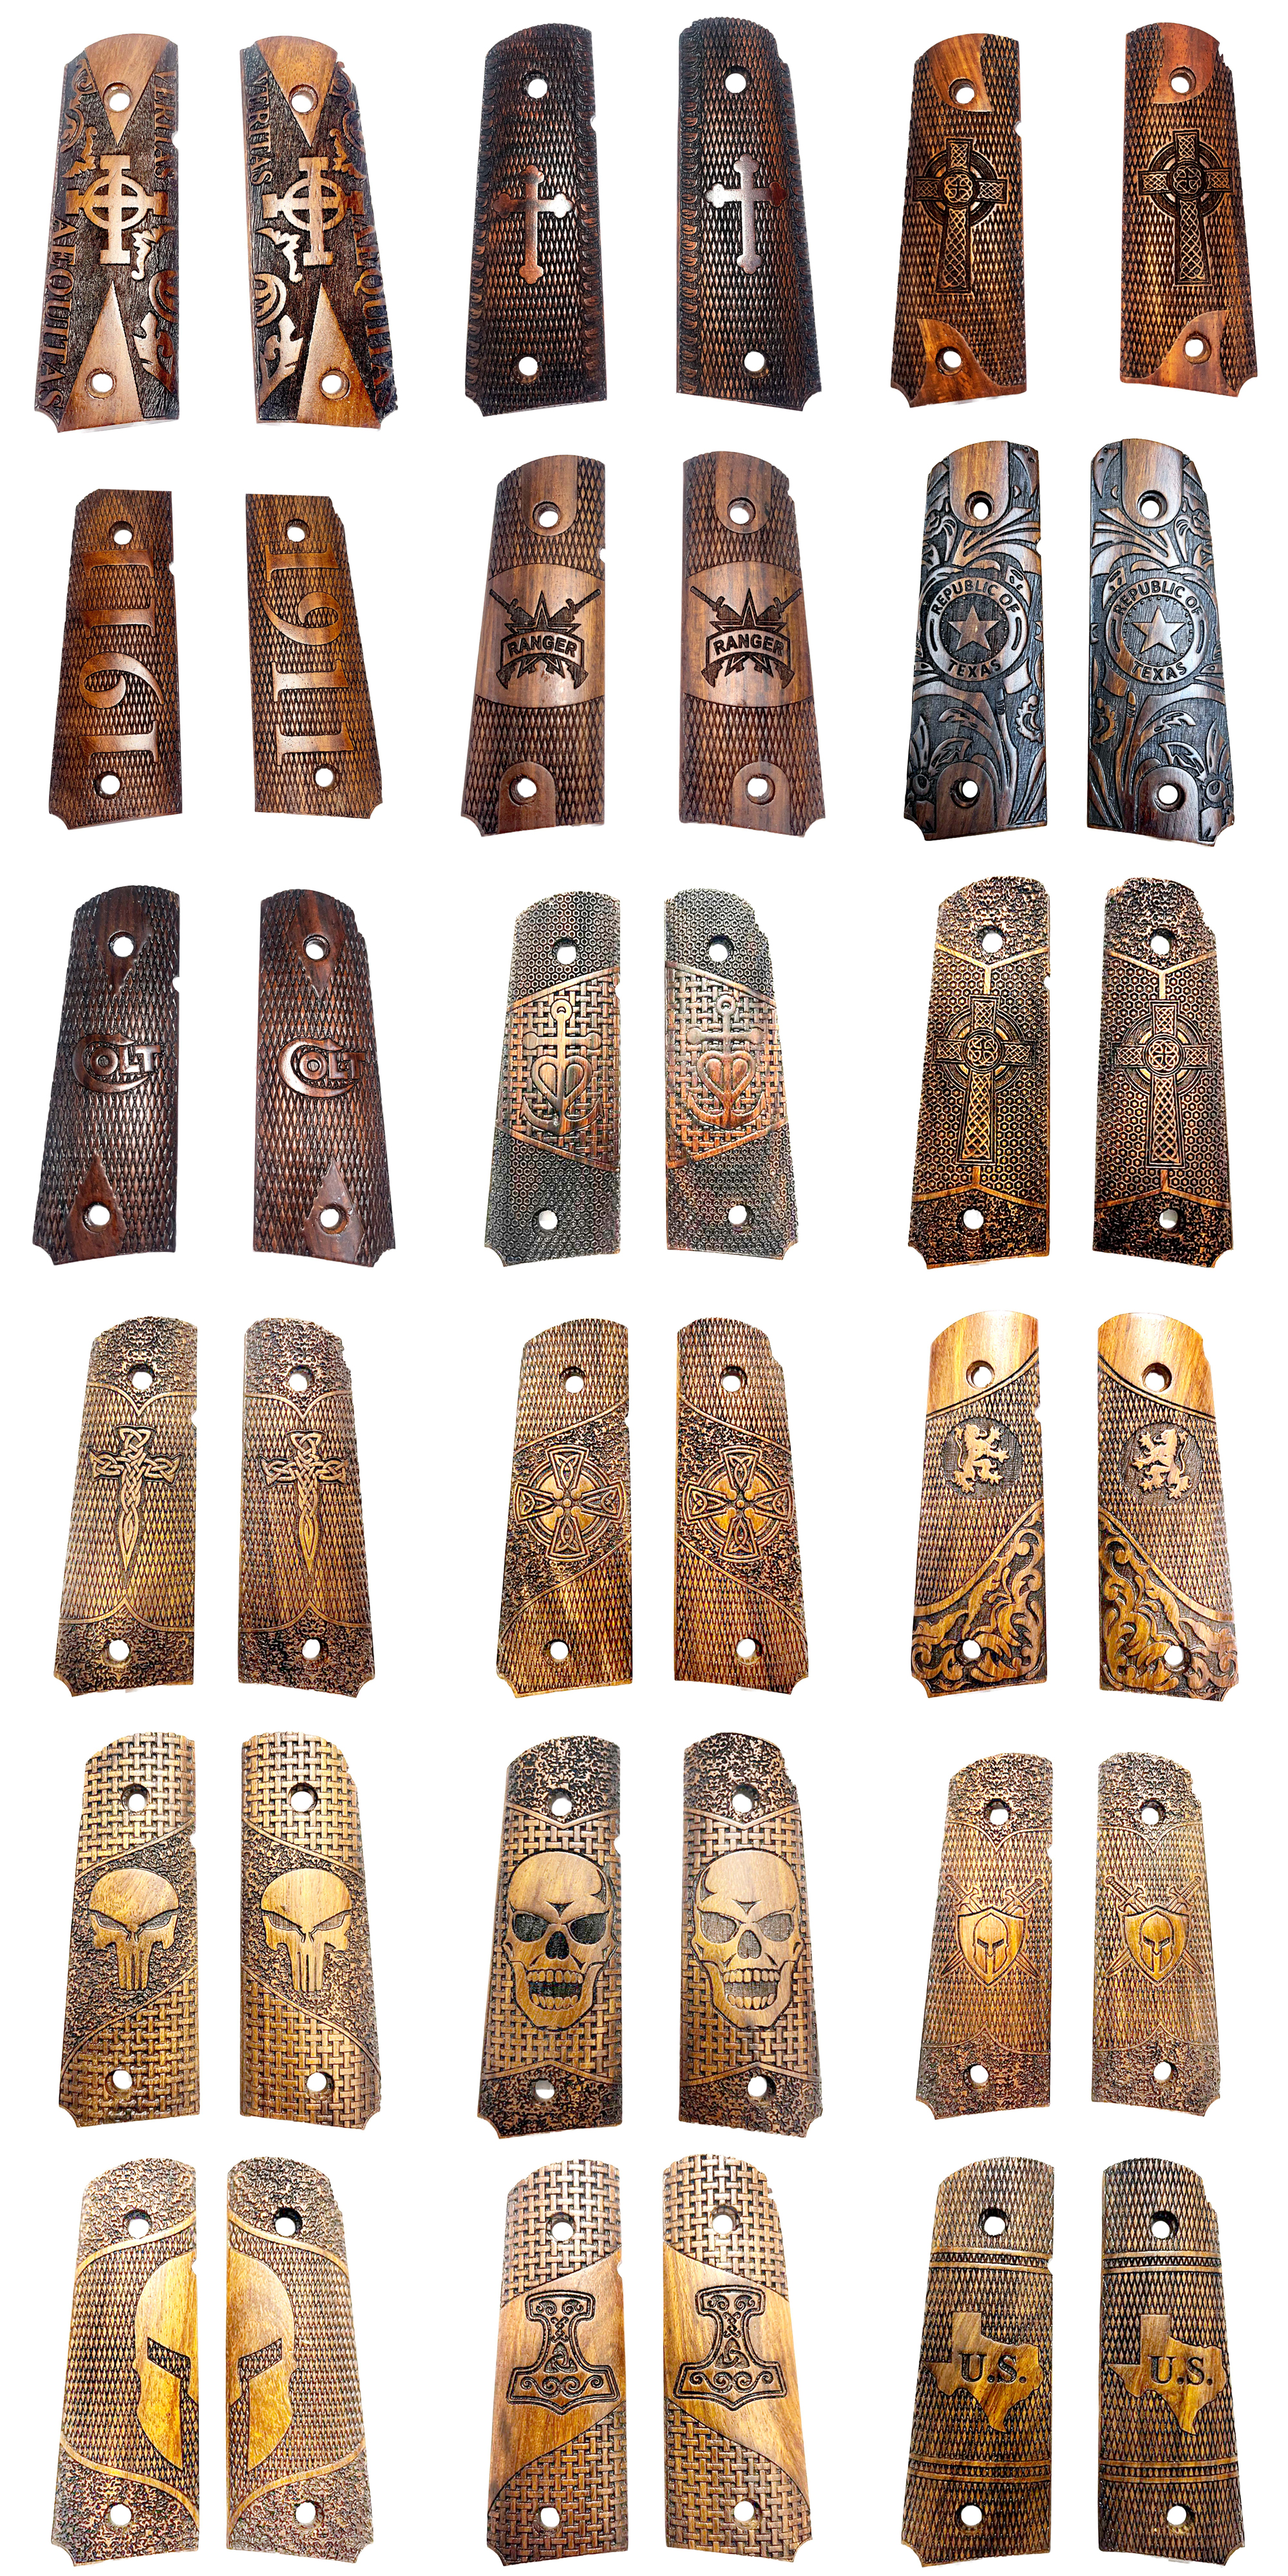 Range of Eighteen Pre-Order Full Size Wood 1911 Pistol Grips with Decorative Finishes